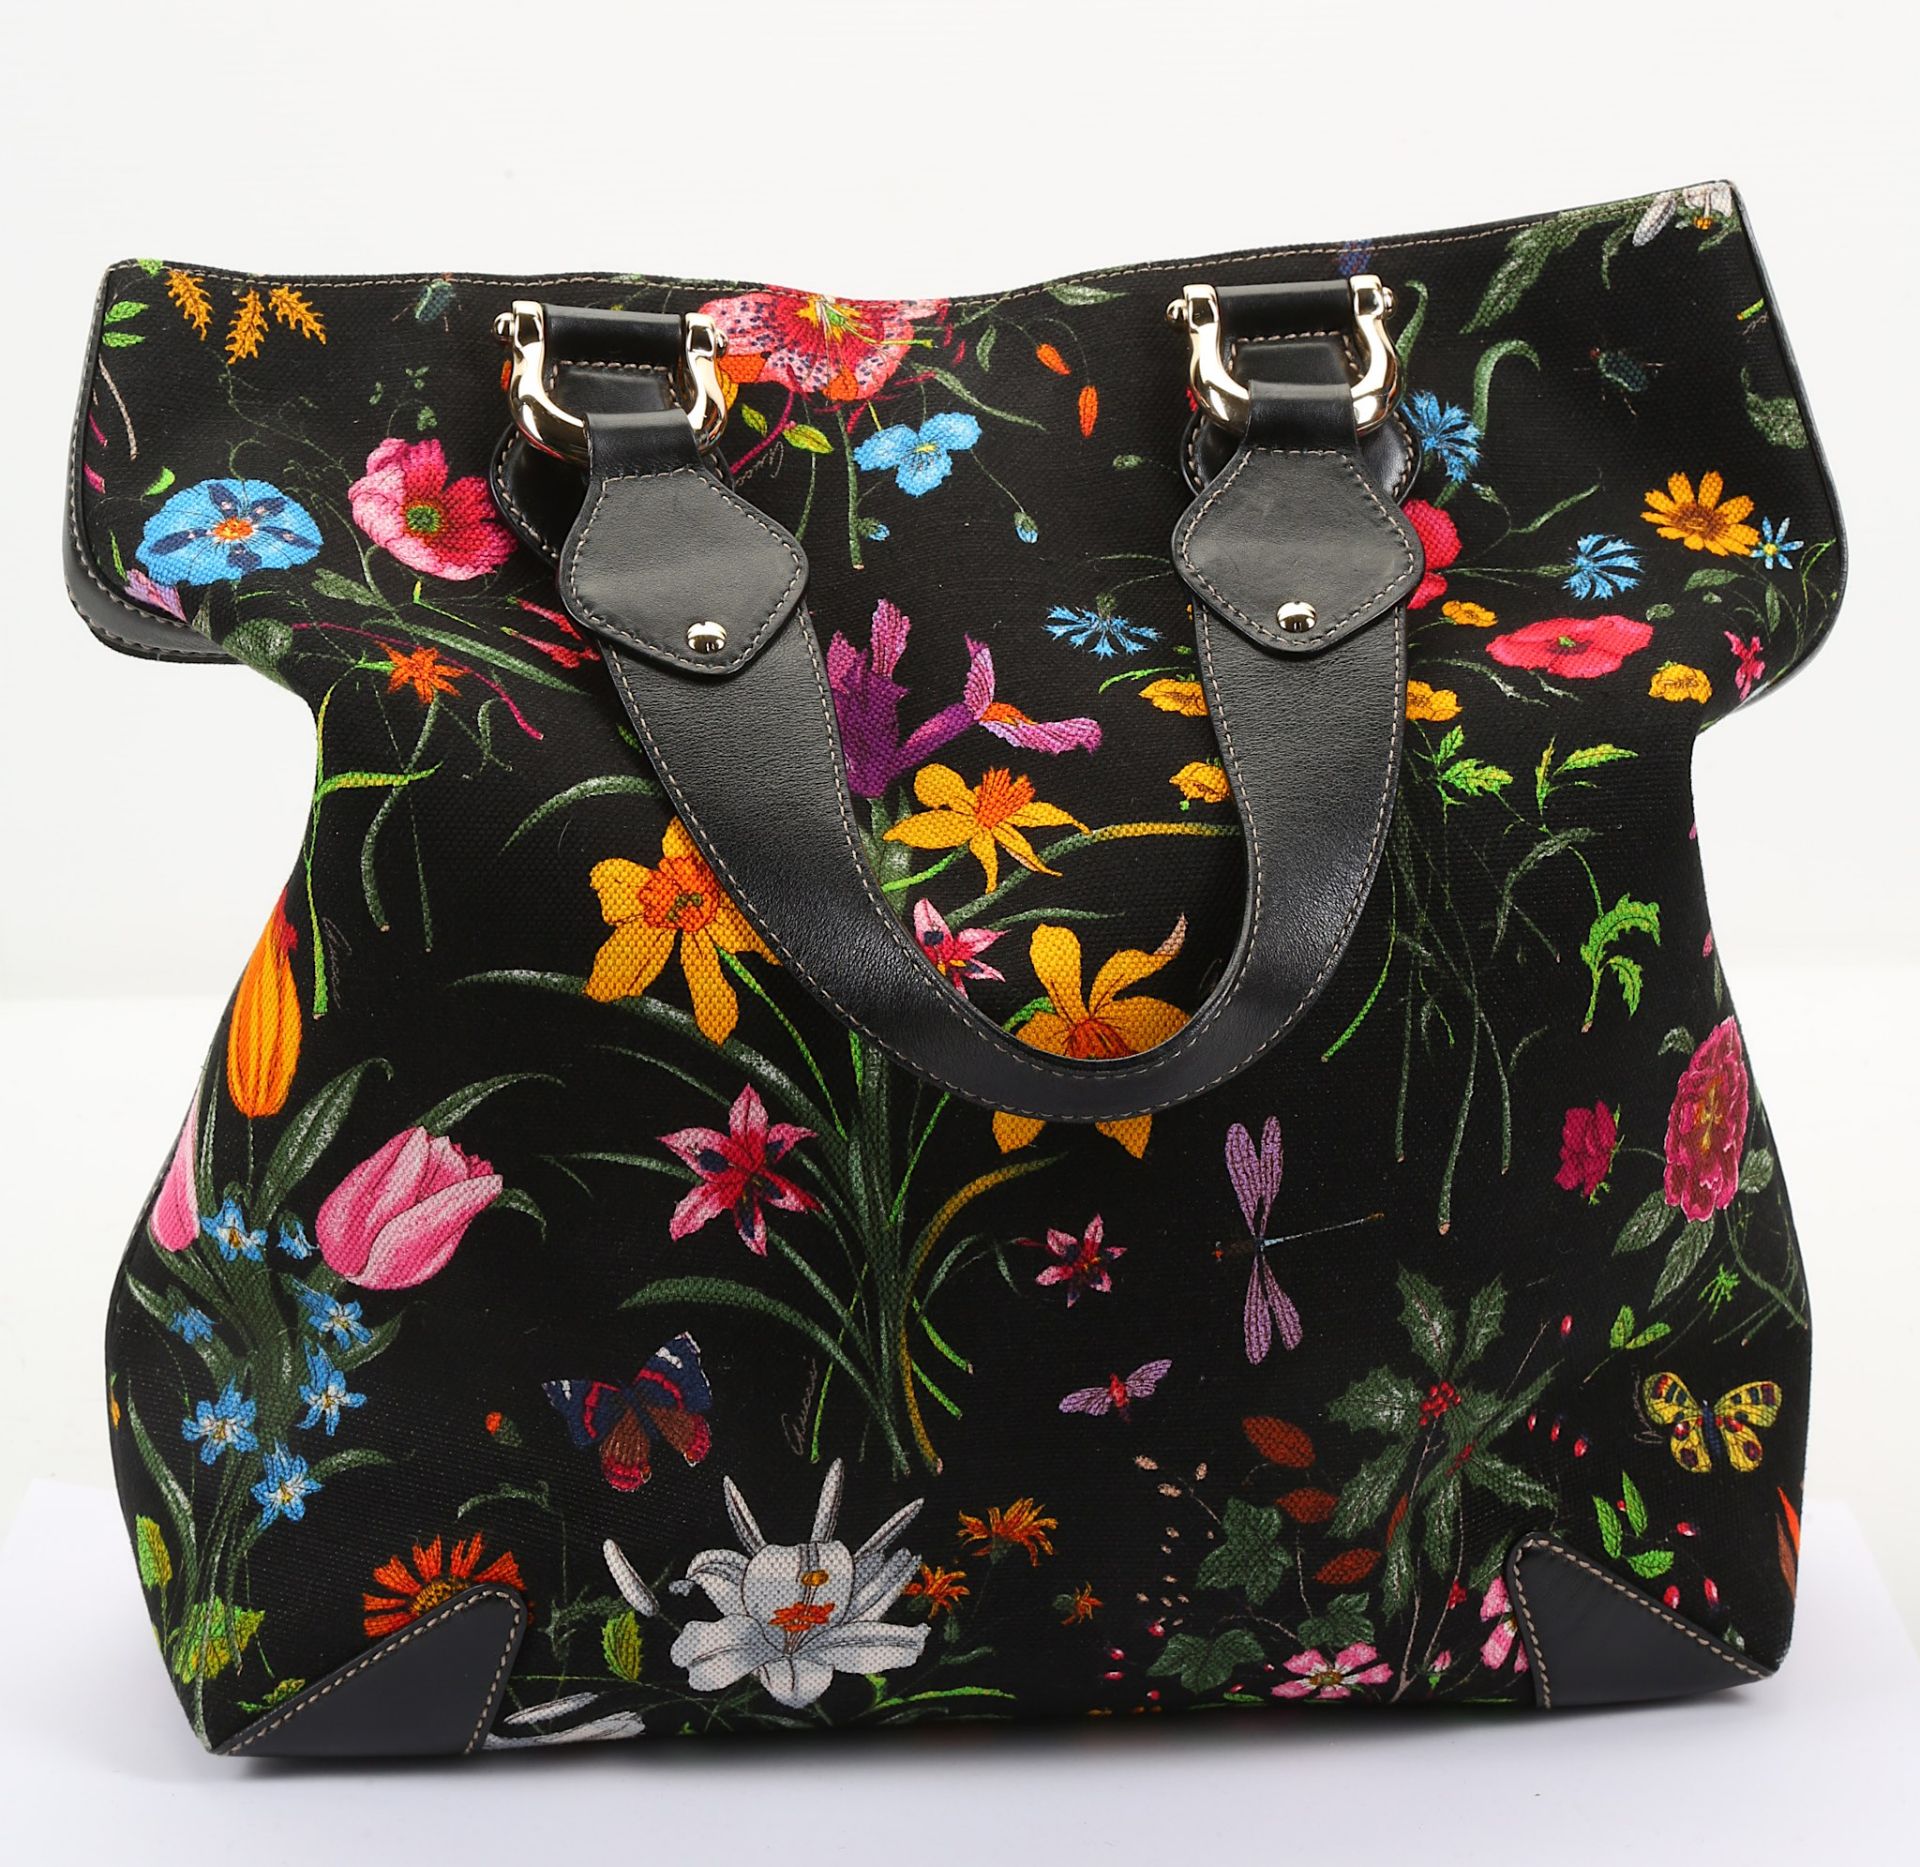 Gucci Black Botanical Canvas Tote, black printed canvas with black leather trim and handles, pale - Image 3 of 6